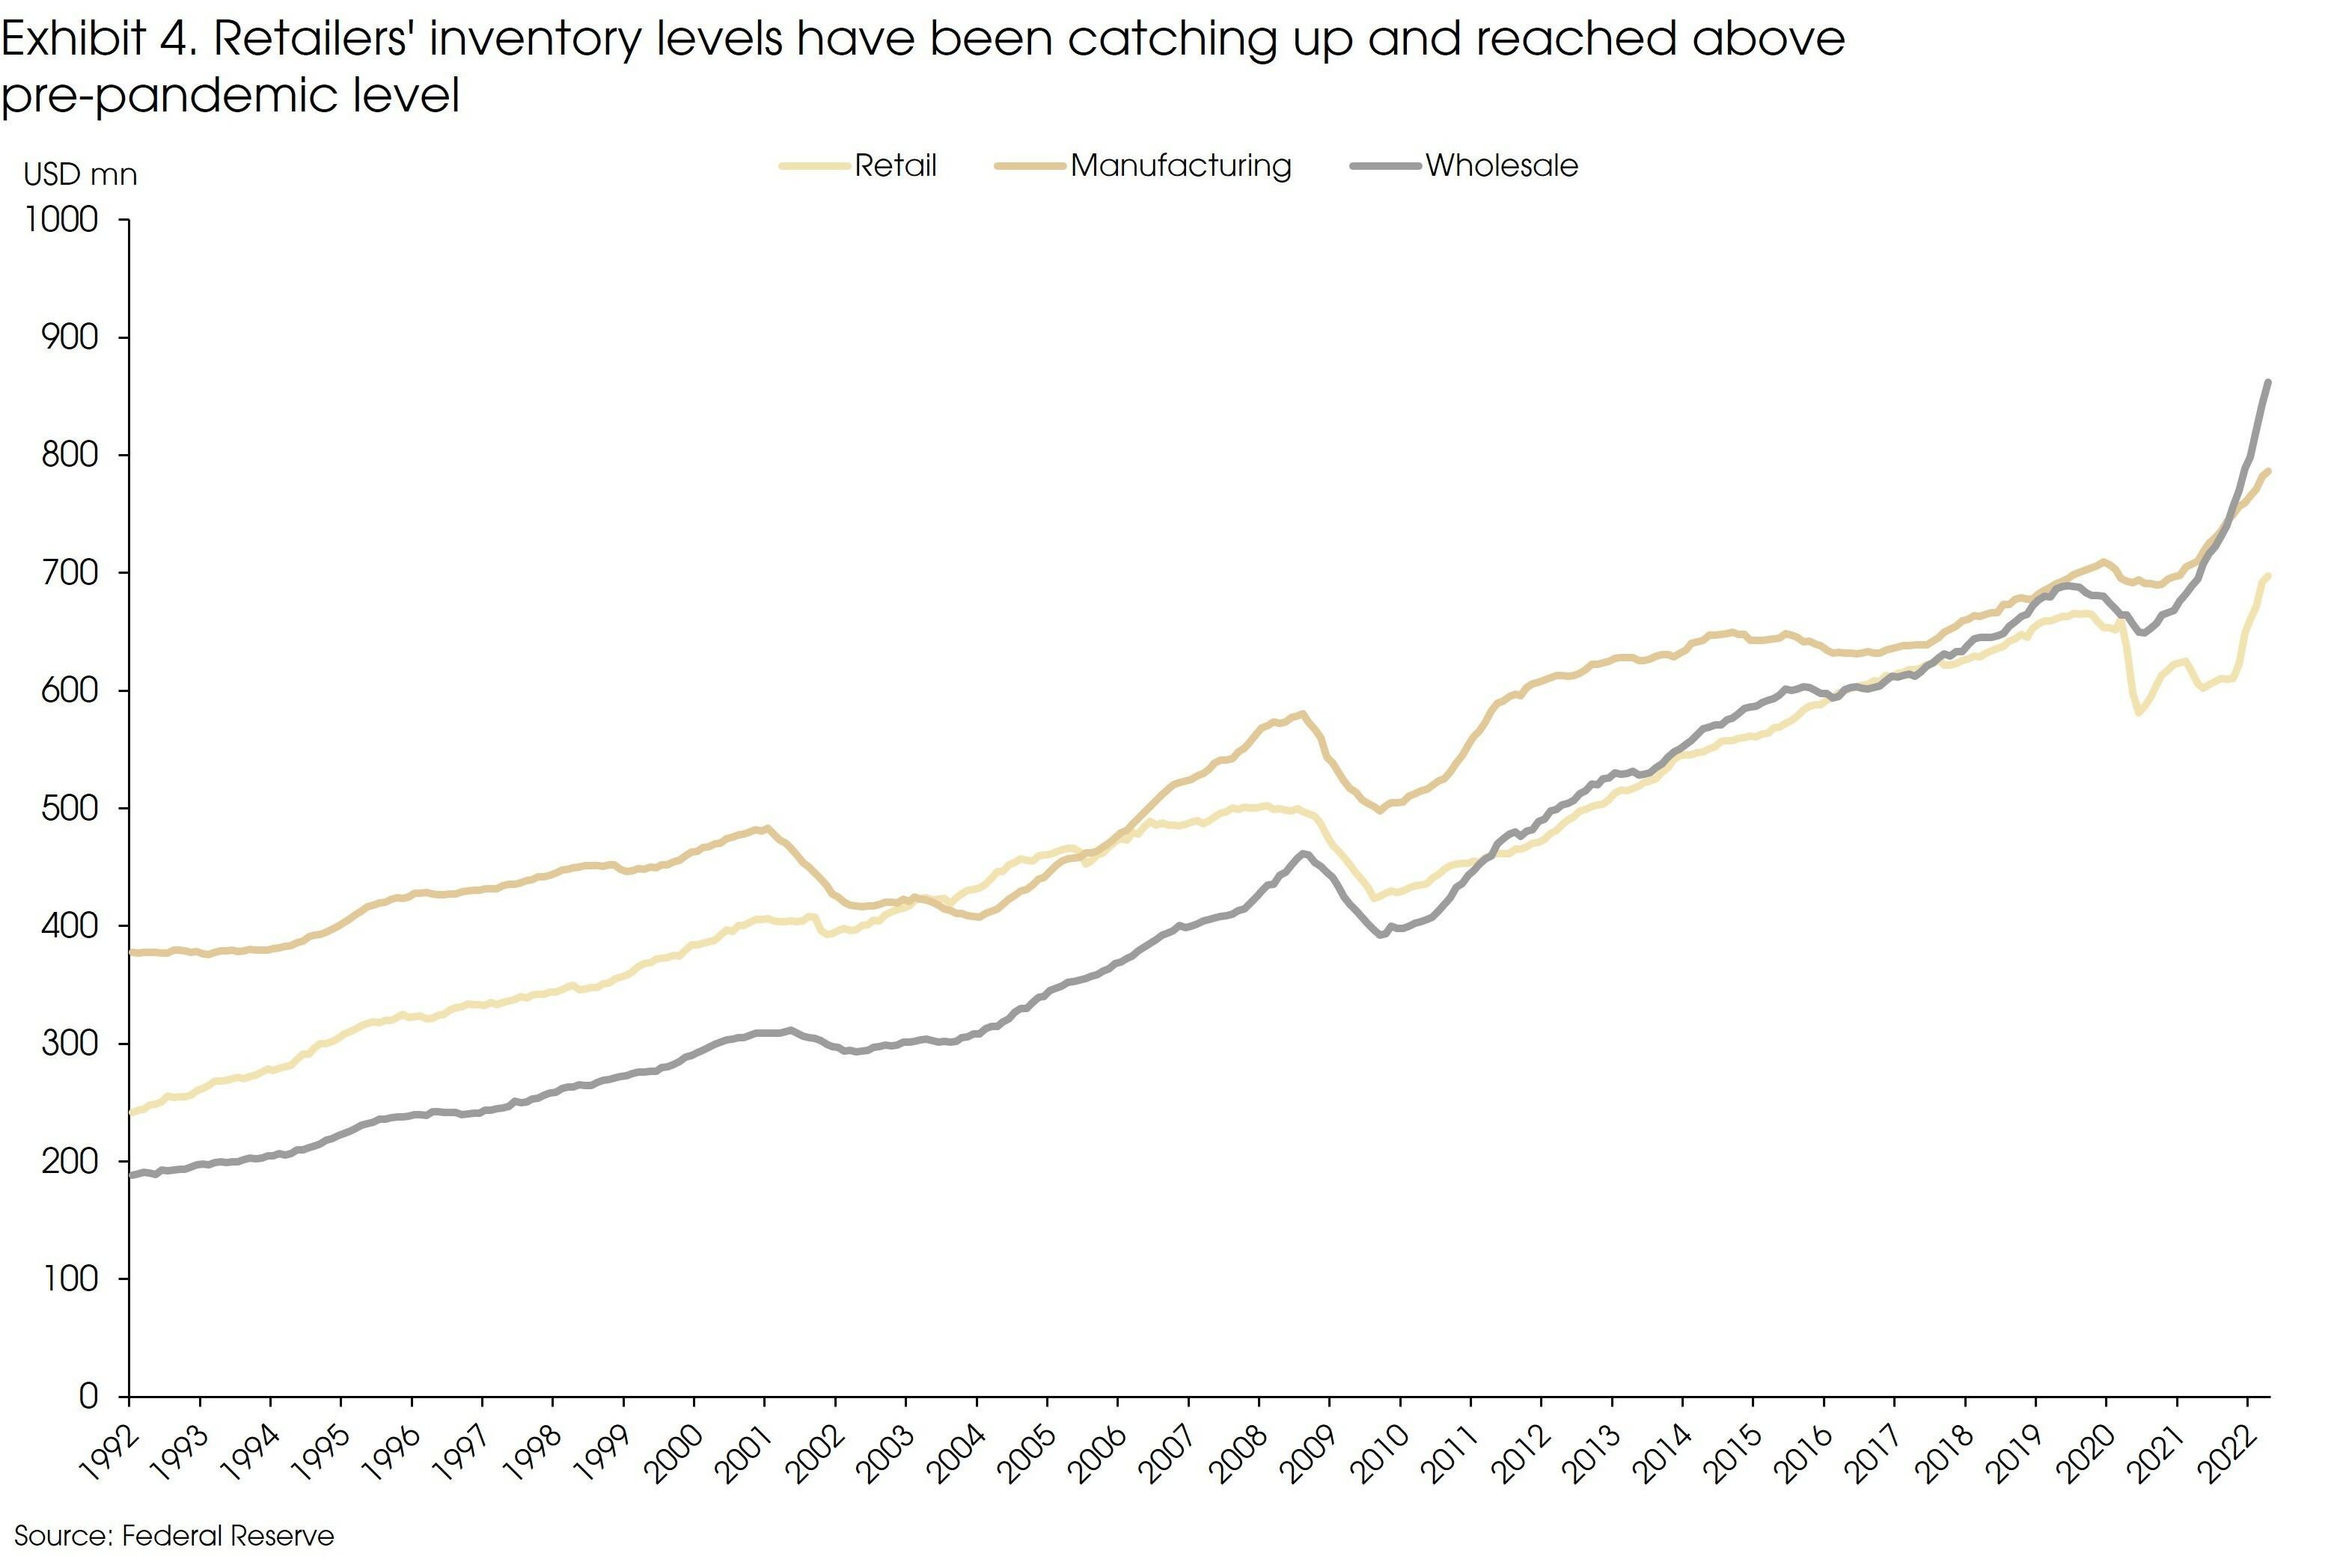 Exhibit 4 Retailers Inventory Levels Have Been Catching Up and Reached Above Pre Pandemic Level